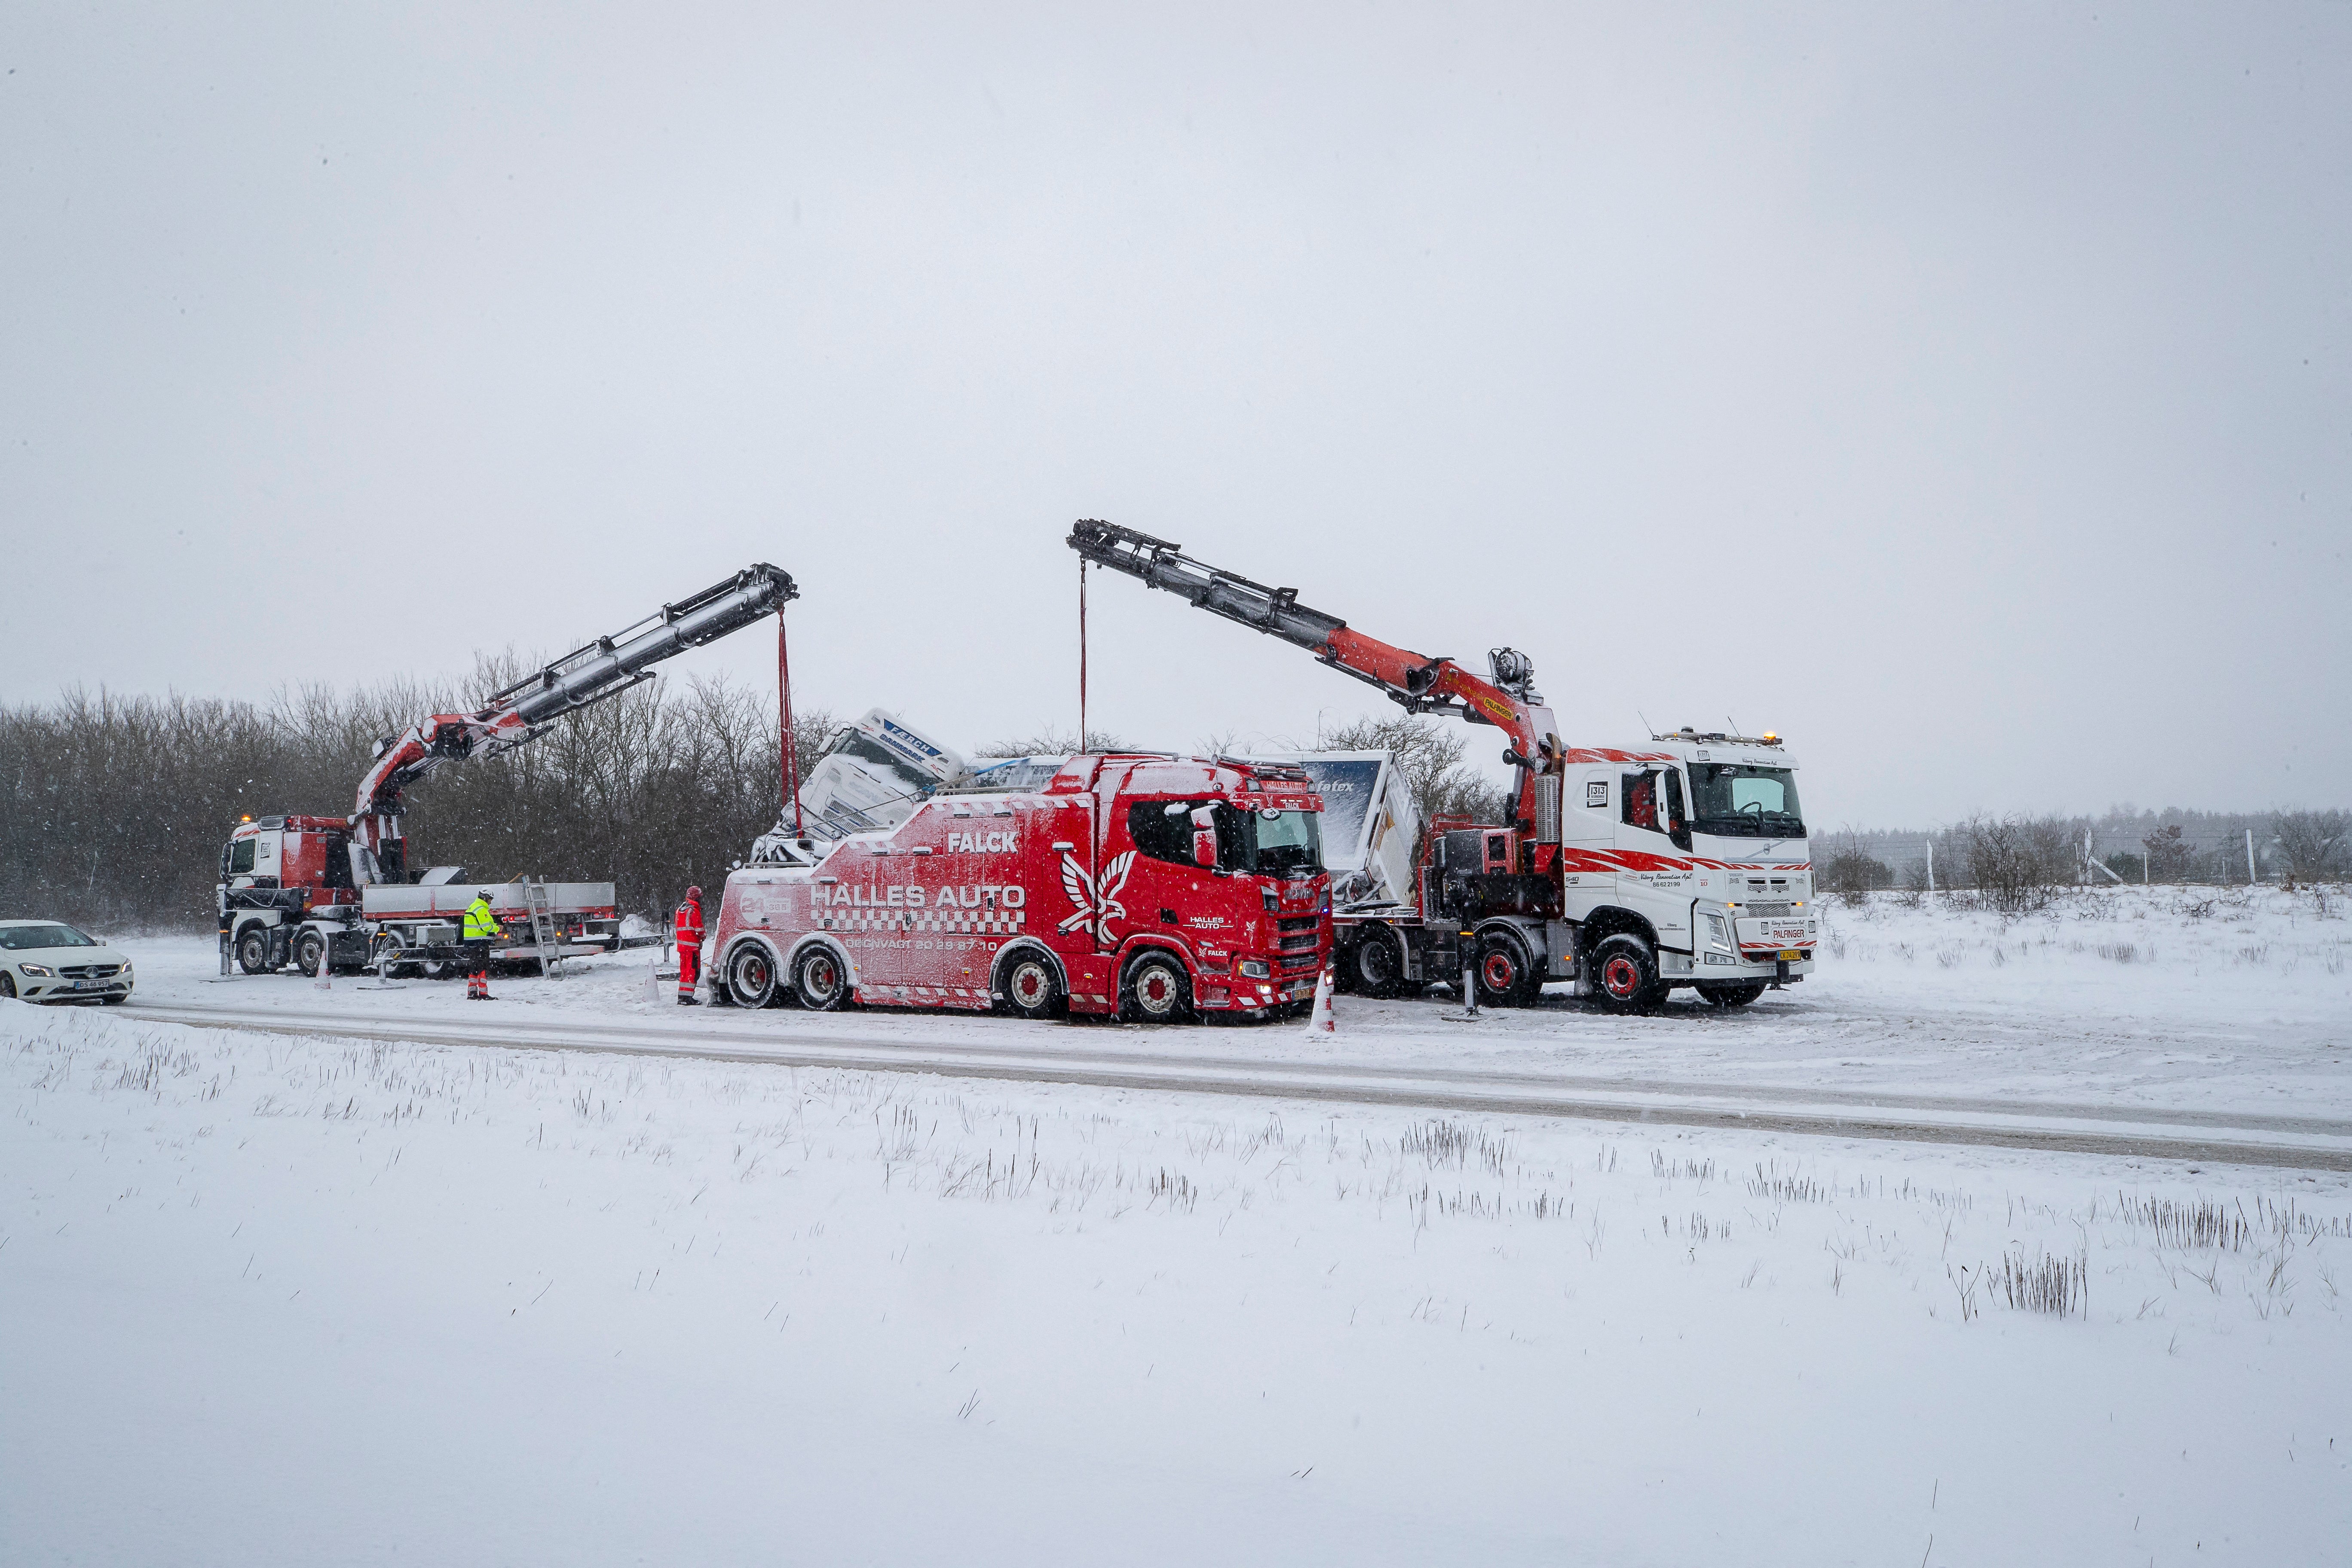 A truck is being removed from the snowy street following an accident during heavy snowfall in Viborg, central Jutland, Denmark